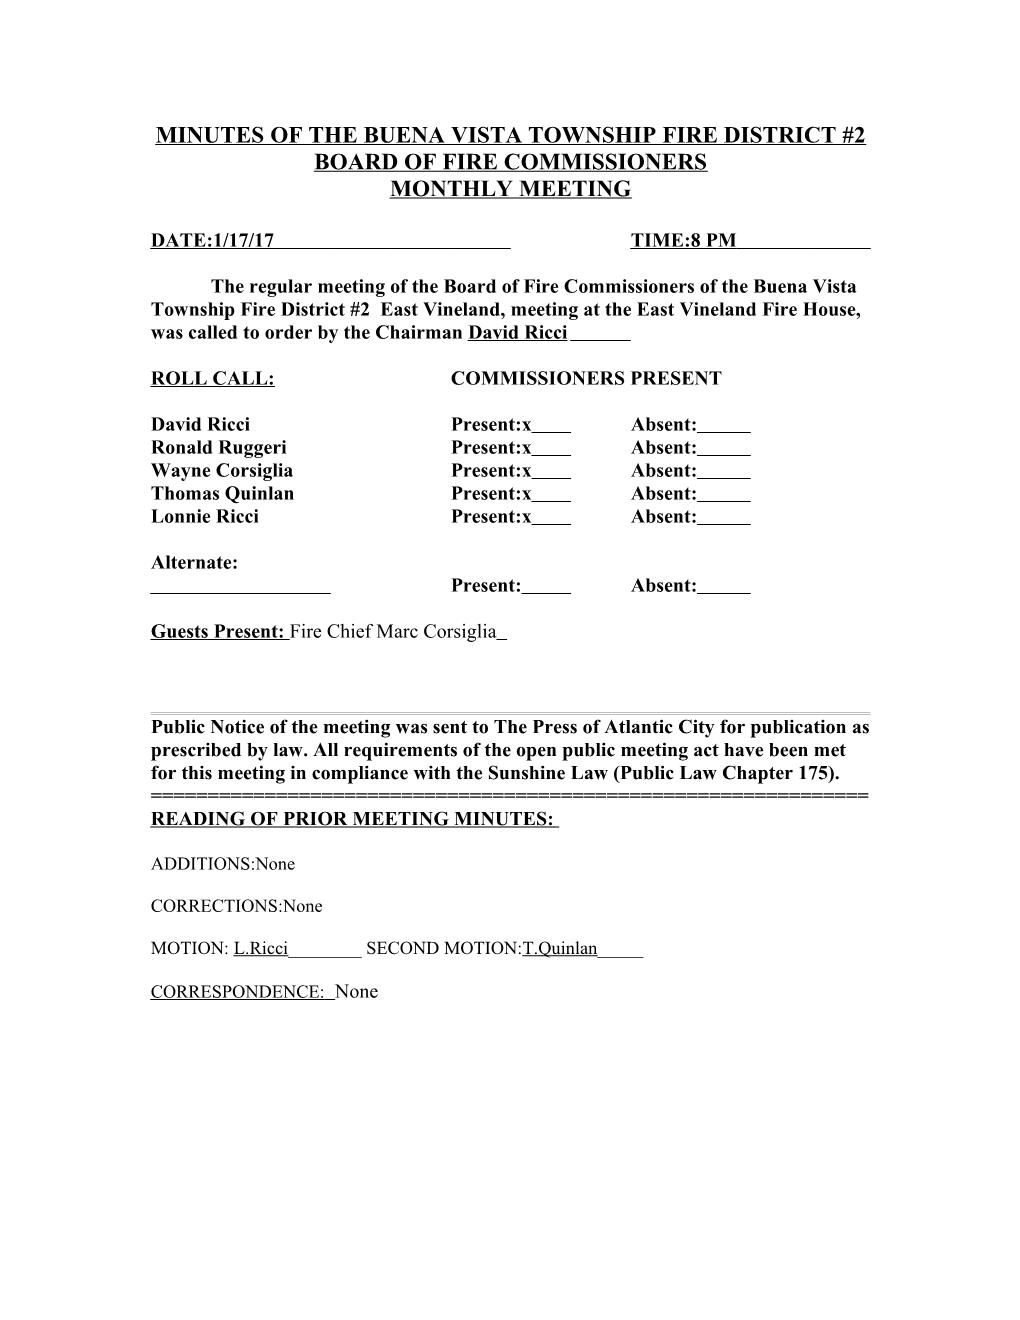 Minutes of the Buena Vista Township Fire District #2